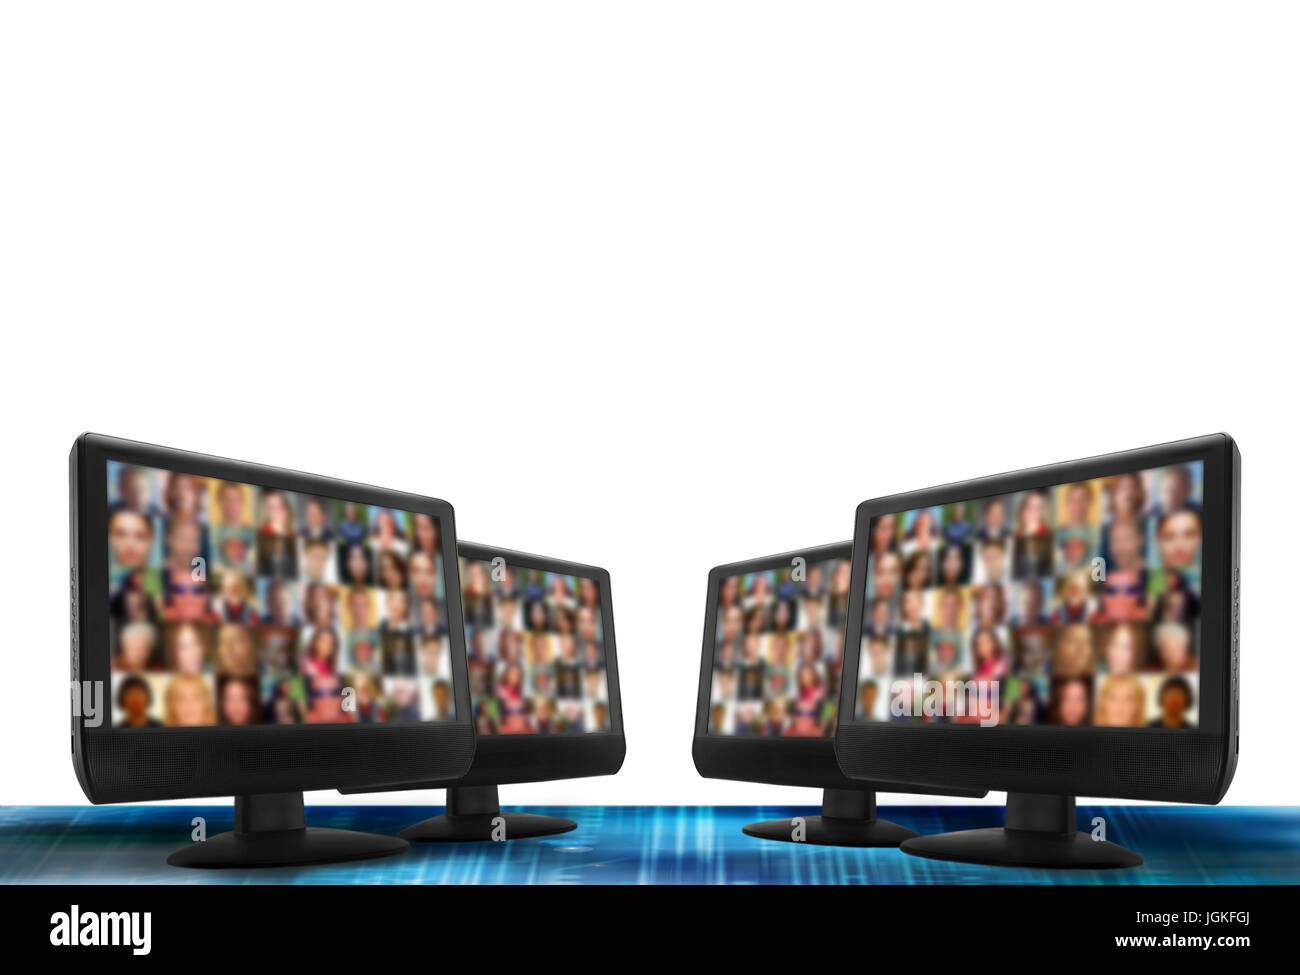 computer monitors with people faces on screen, social media concept Stock Photo